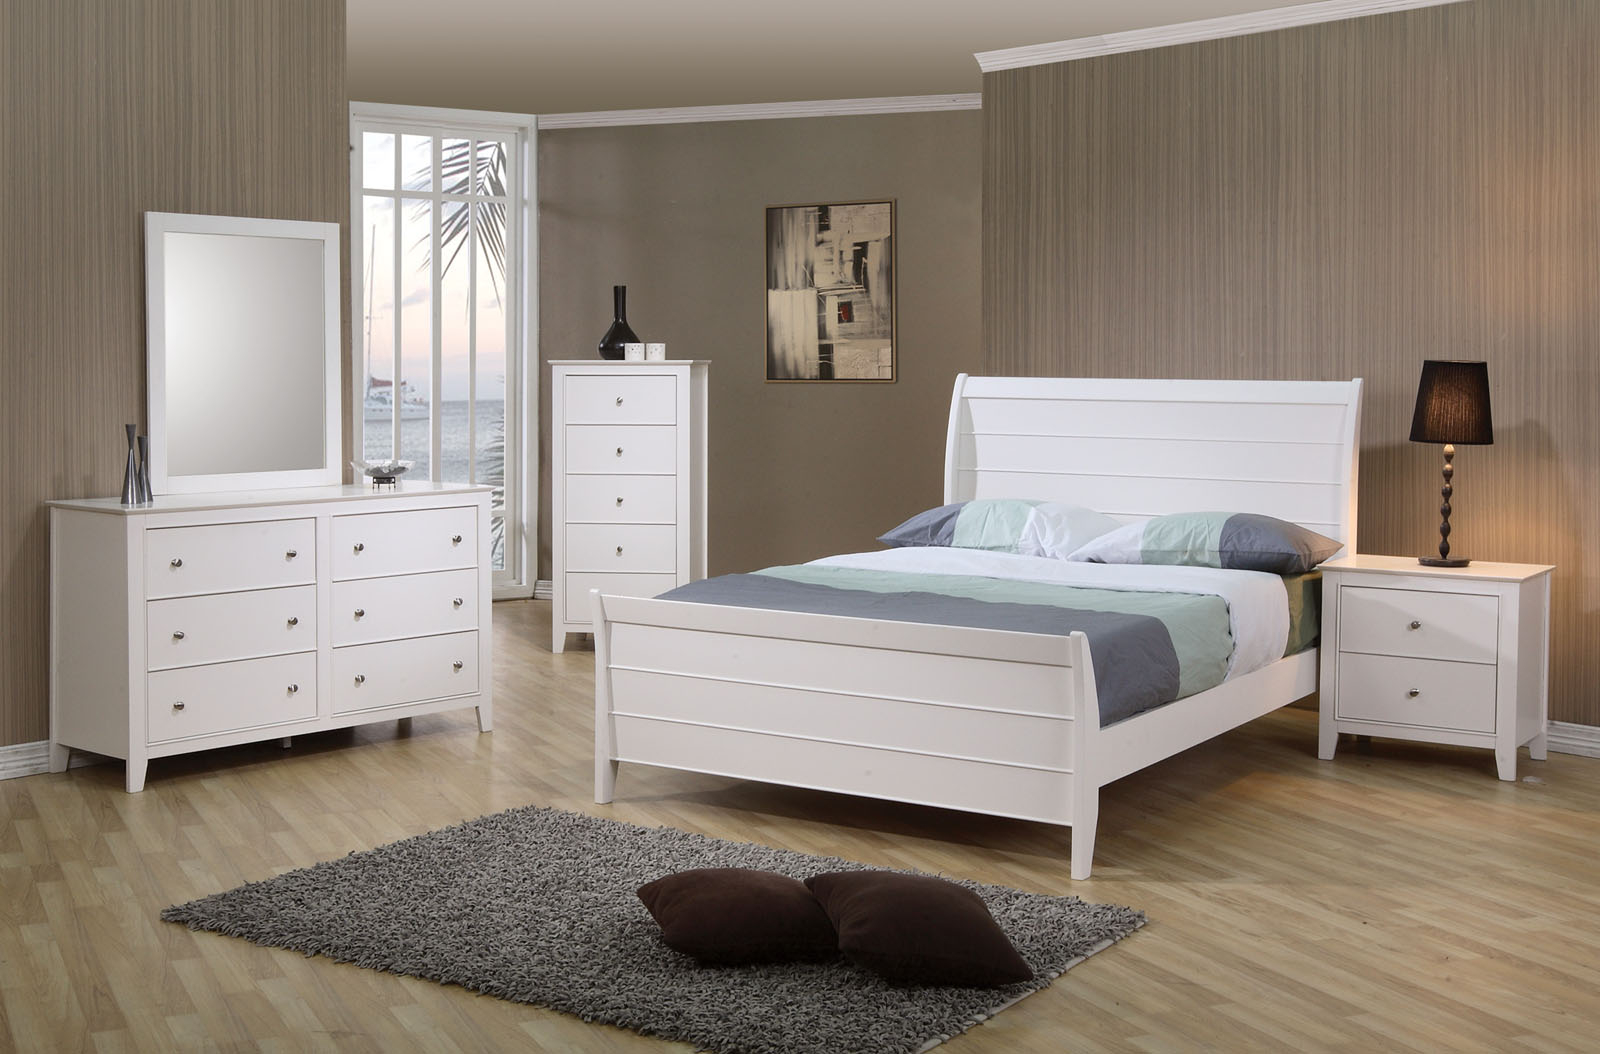 Coaster Selena Youth 4pc Sleigh Bedroom Set In White 400231 within measurements 1600 X 1054